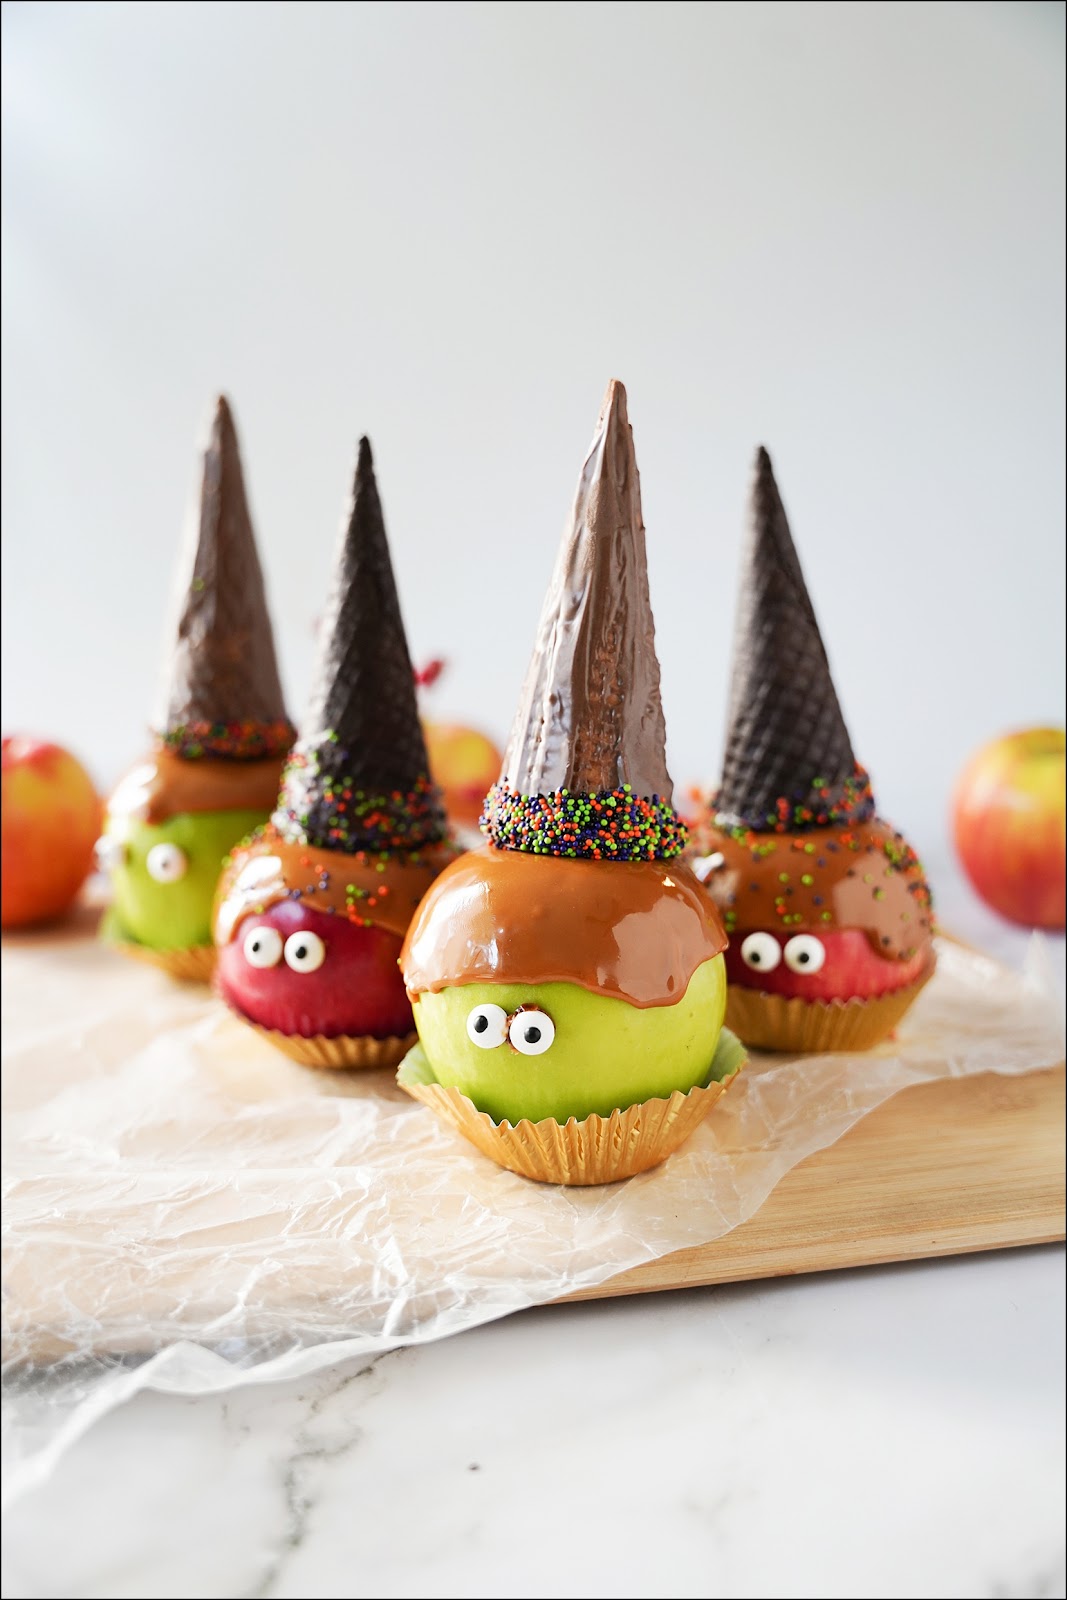 Bake your caramel apples for 3-5 minutes at    ℉. Then top with a chocolate-covered cone.
